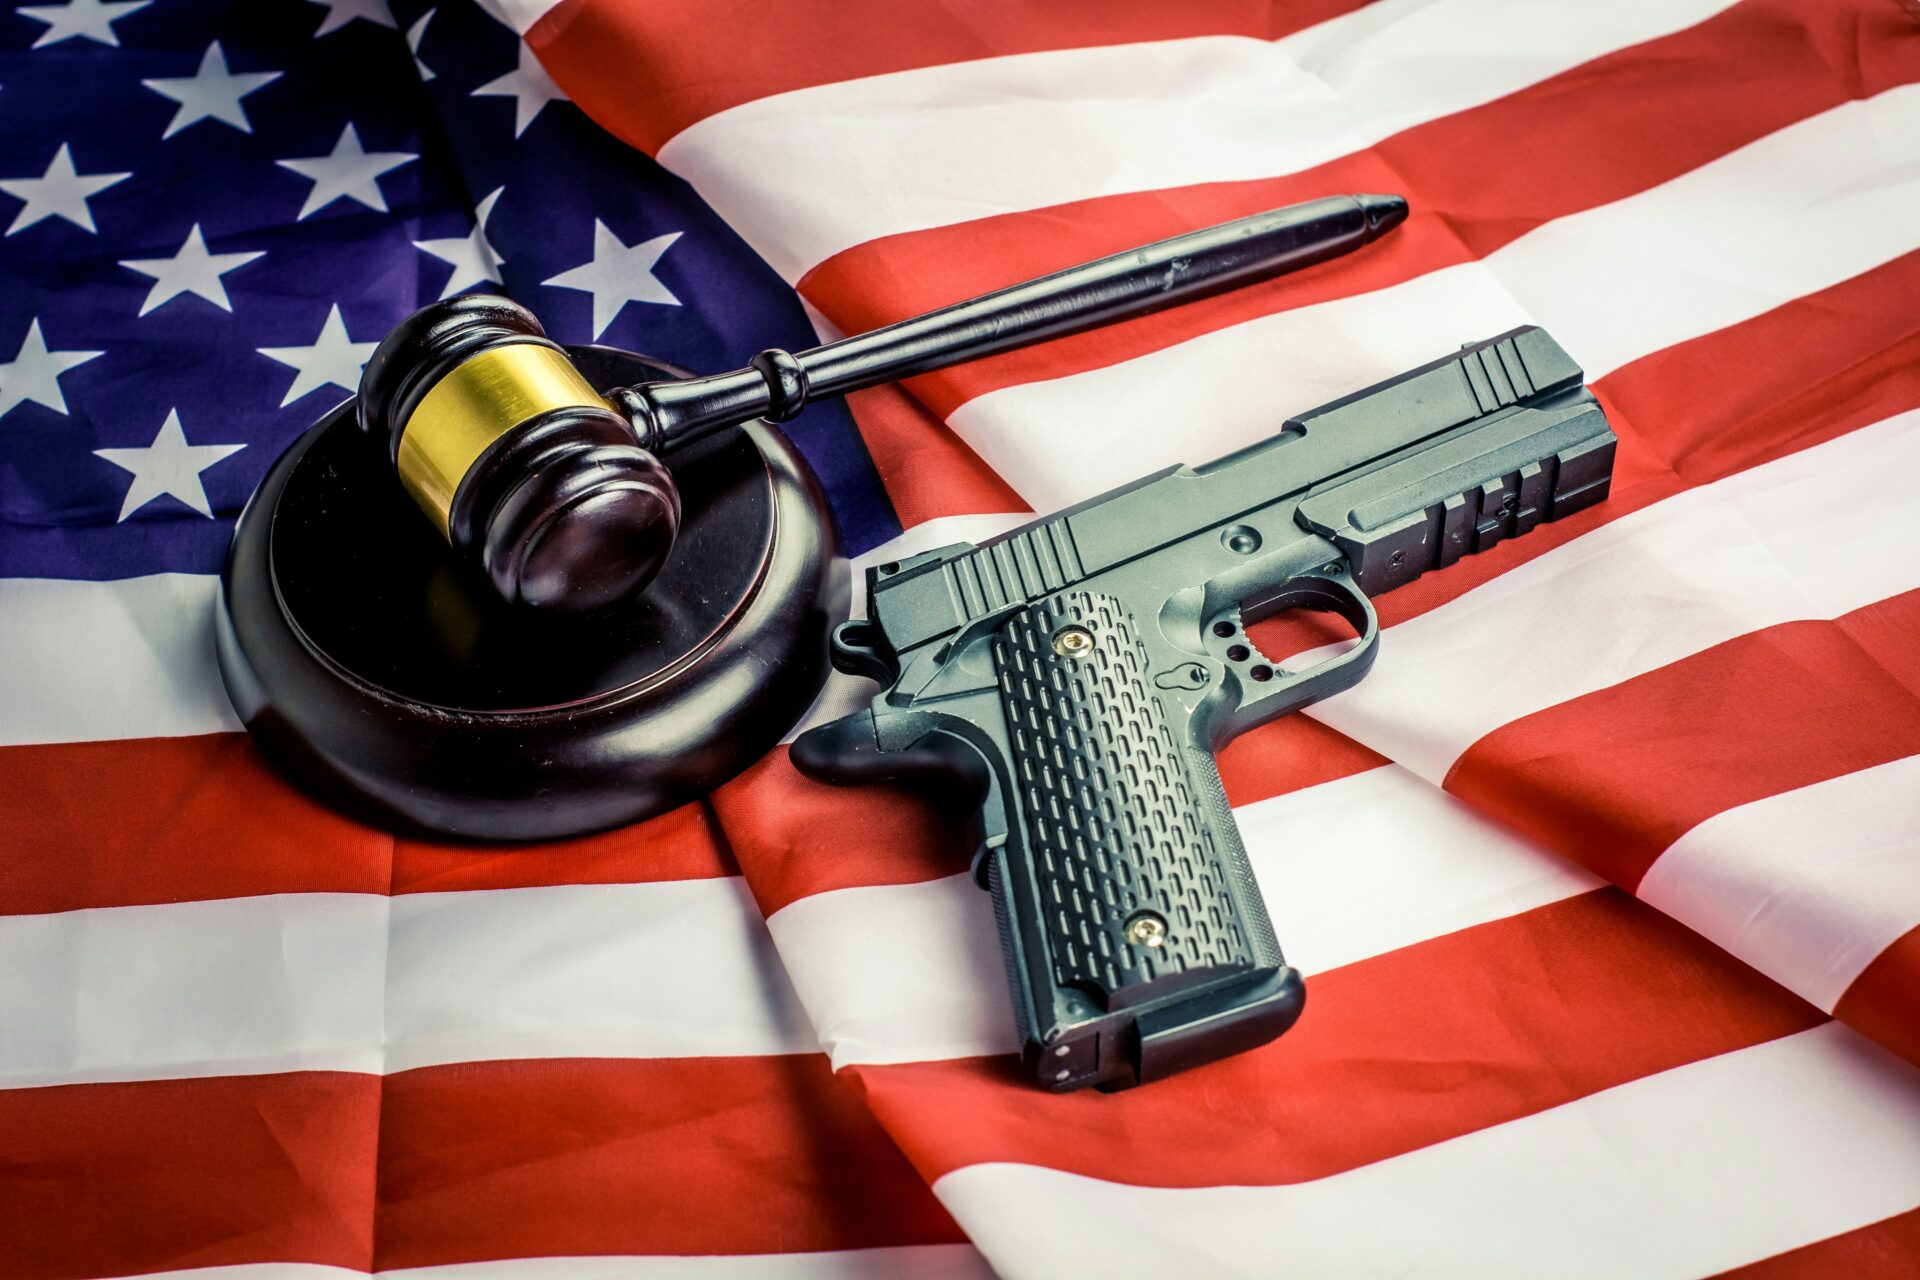 Wooden judge gavel and black color gun over USA flag. Subscribe my channel: https://www.youtube.com/@earthzoom | Donation: https://fantalks.io/r/bermixstudio - any amount appreciated 🤘 Thanks friend!